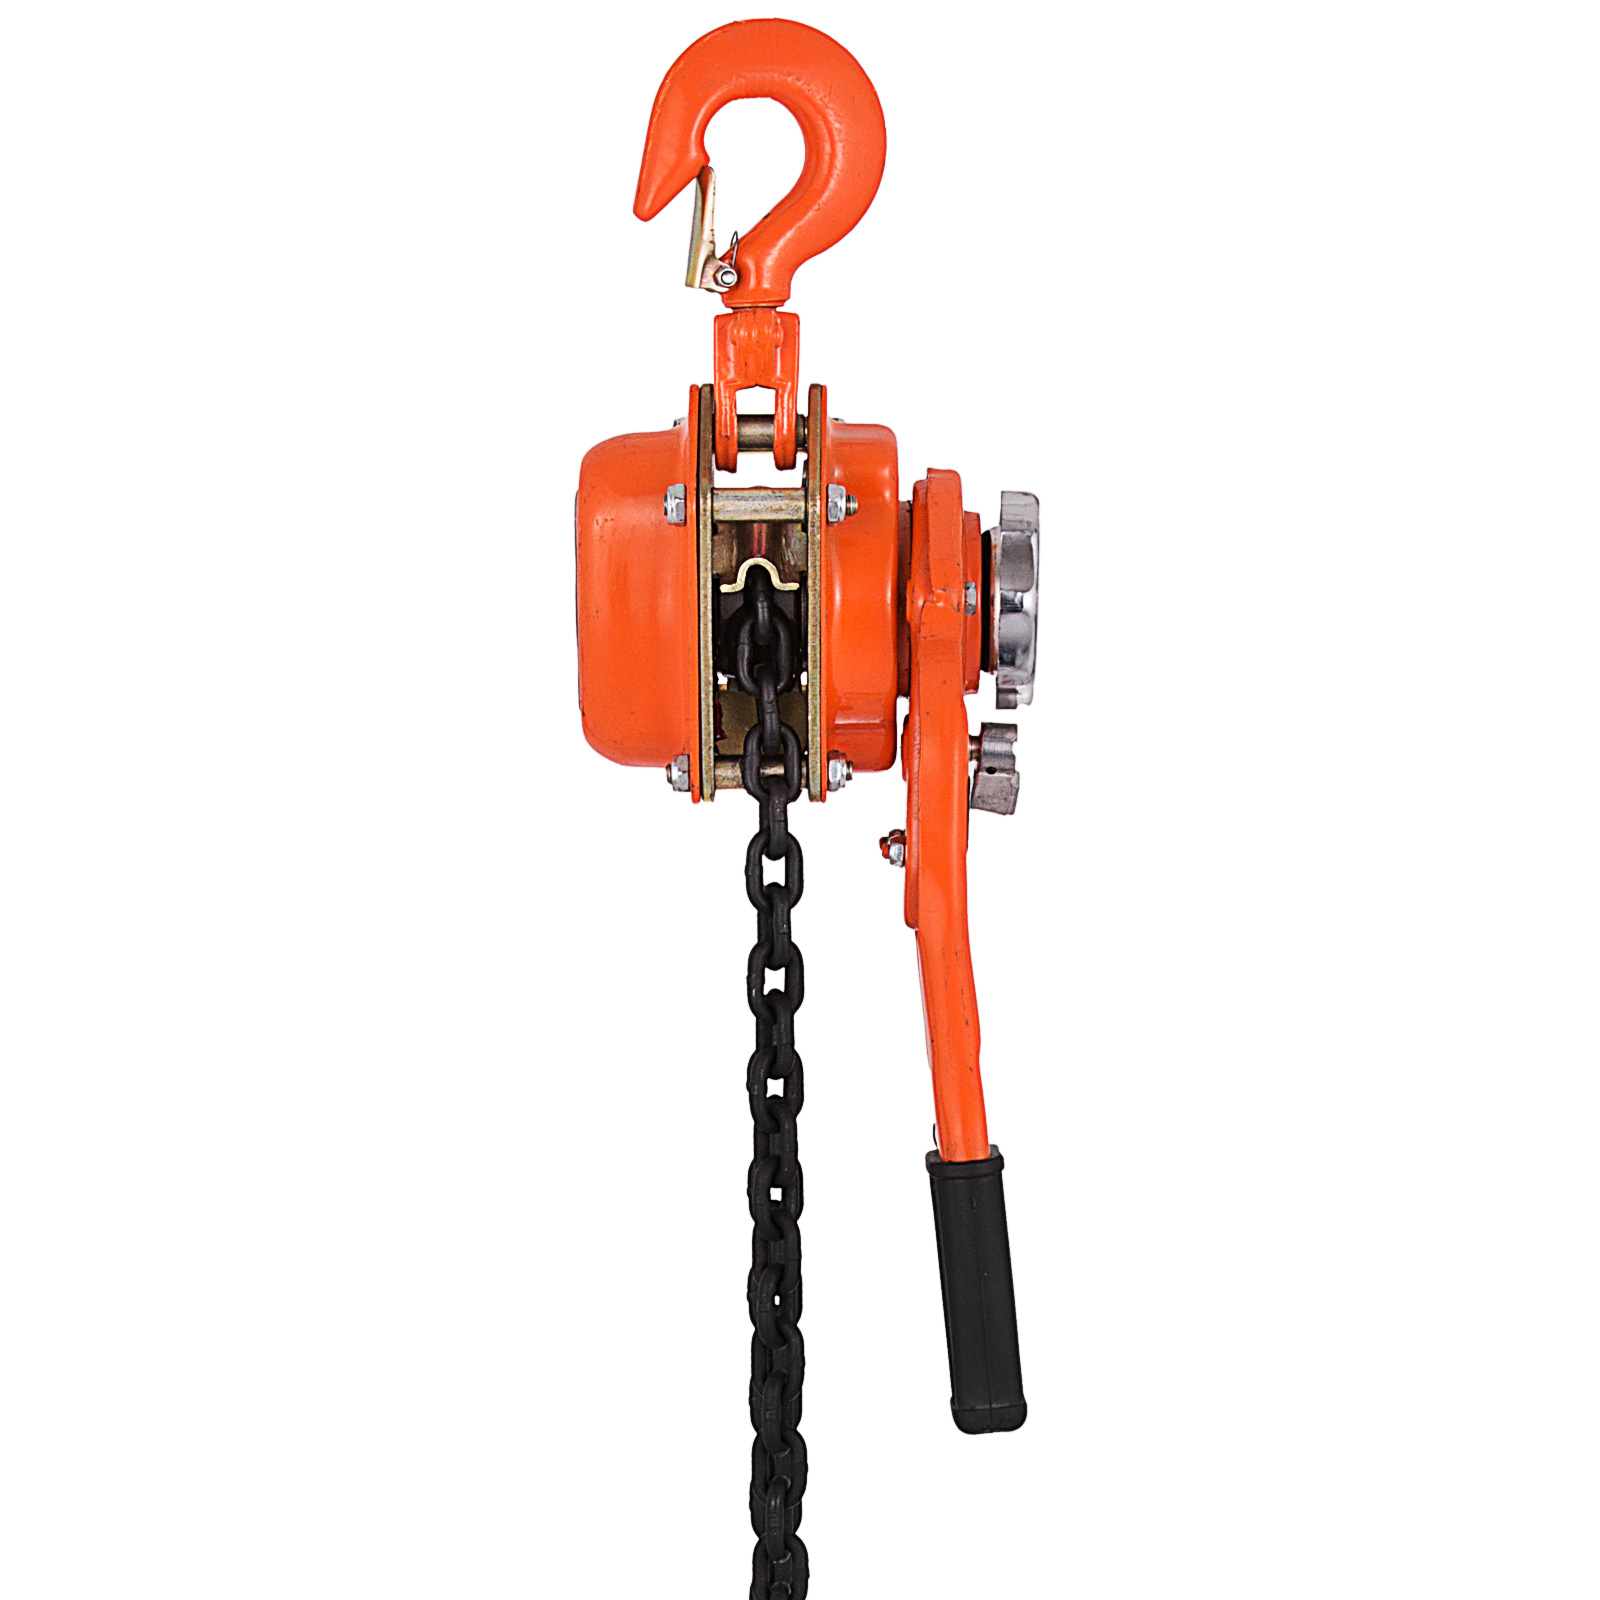 Fencia 1.5 Ton Lift Lever Block Chain Hoist 5FT Chain Come Along Portable Ratchet Puller Hoists for Lifting【US Shipping】 